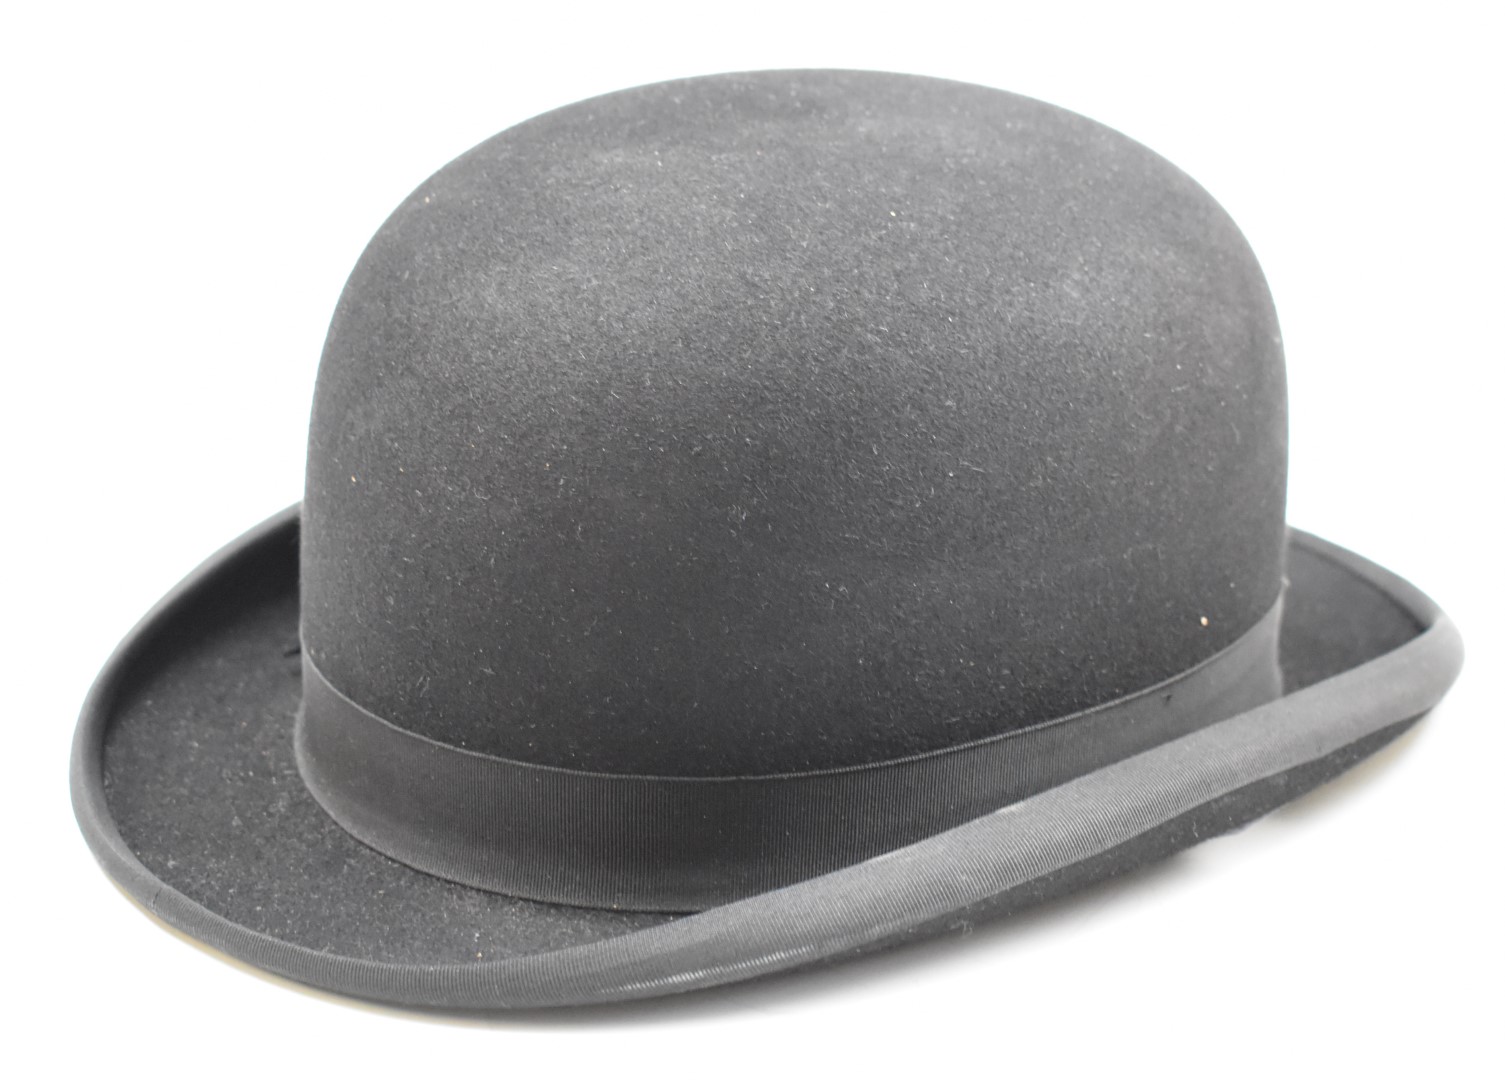 Silk top hat by Tress & Co, in hat box, together with a bowler hat - Image 7 of 12